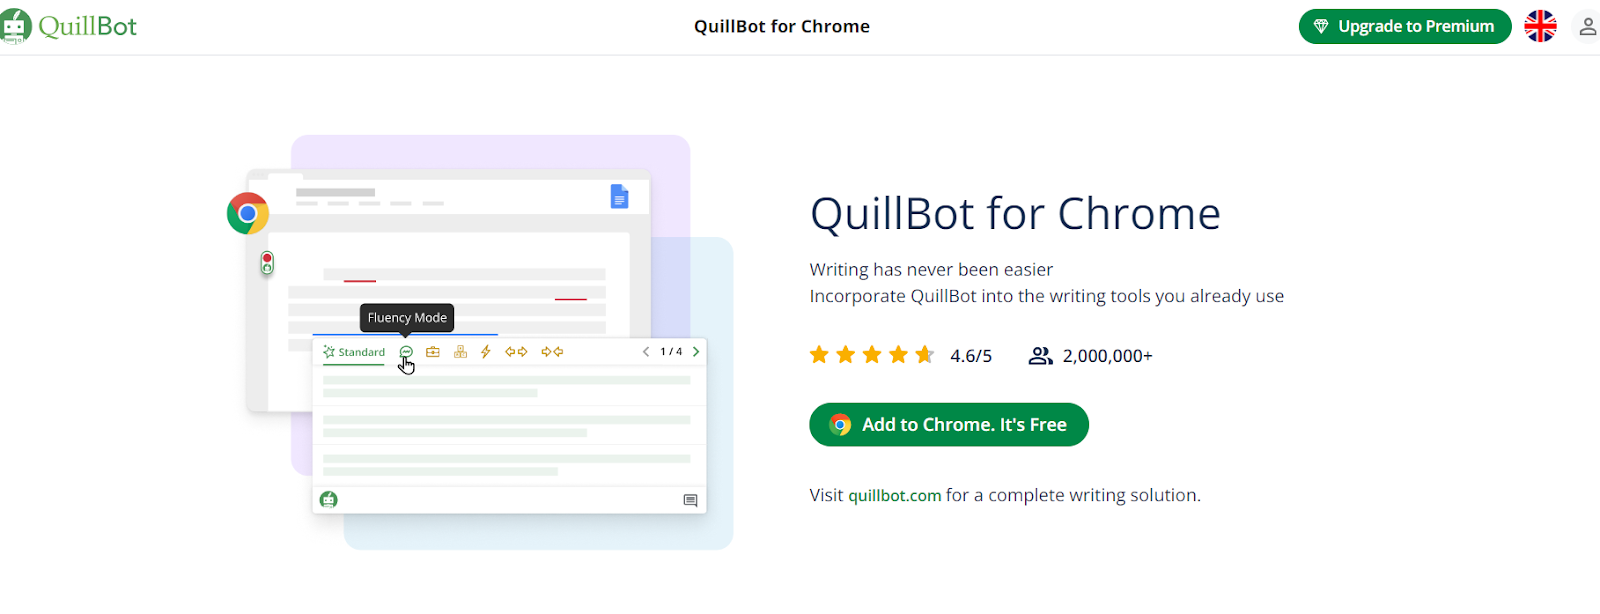 Quillbot AI writing assistant